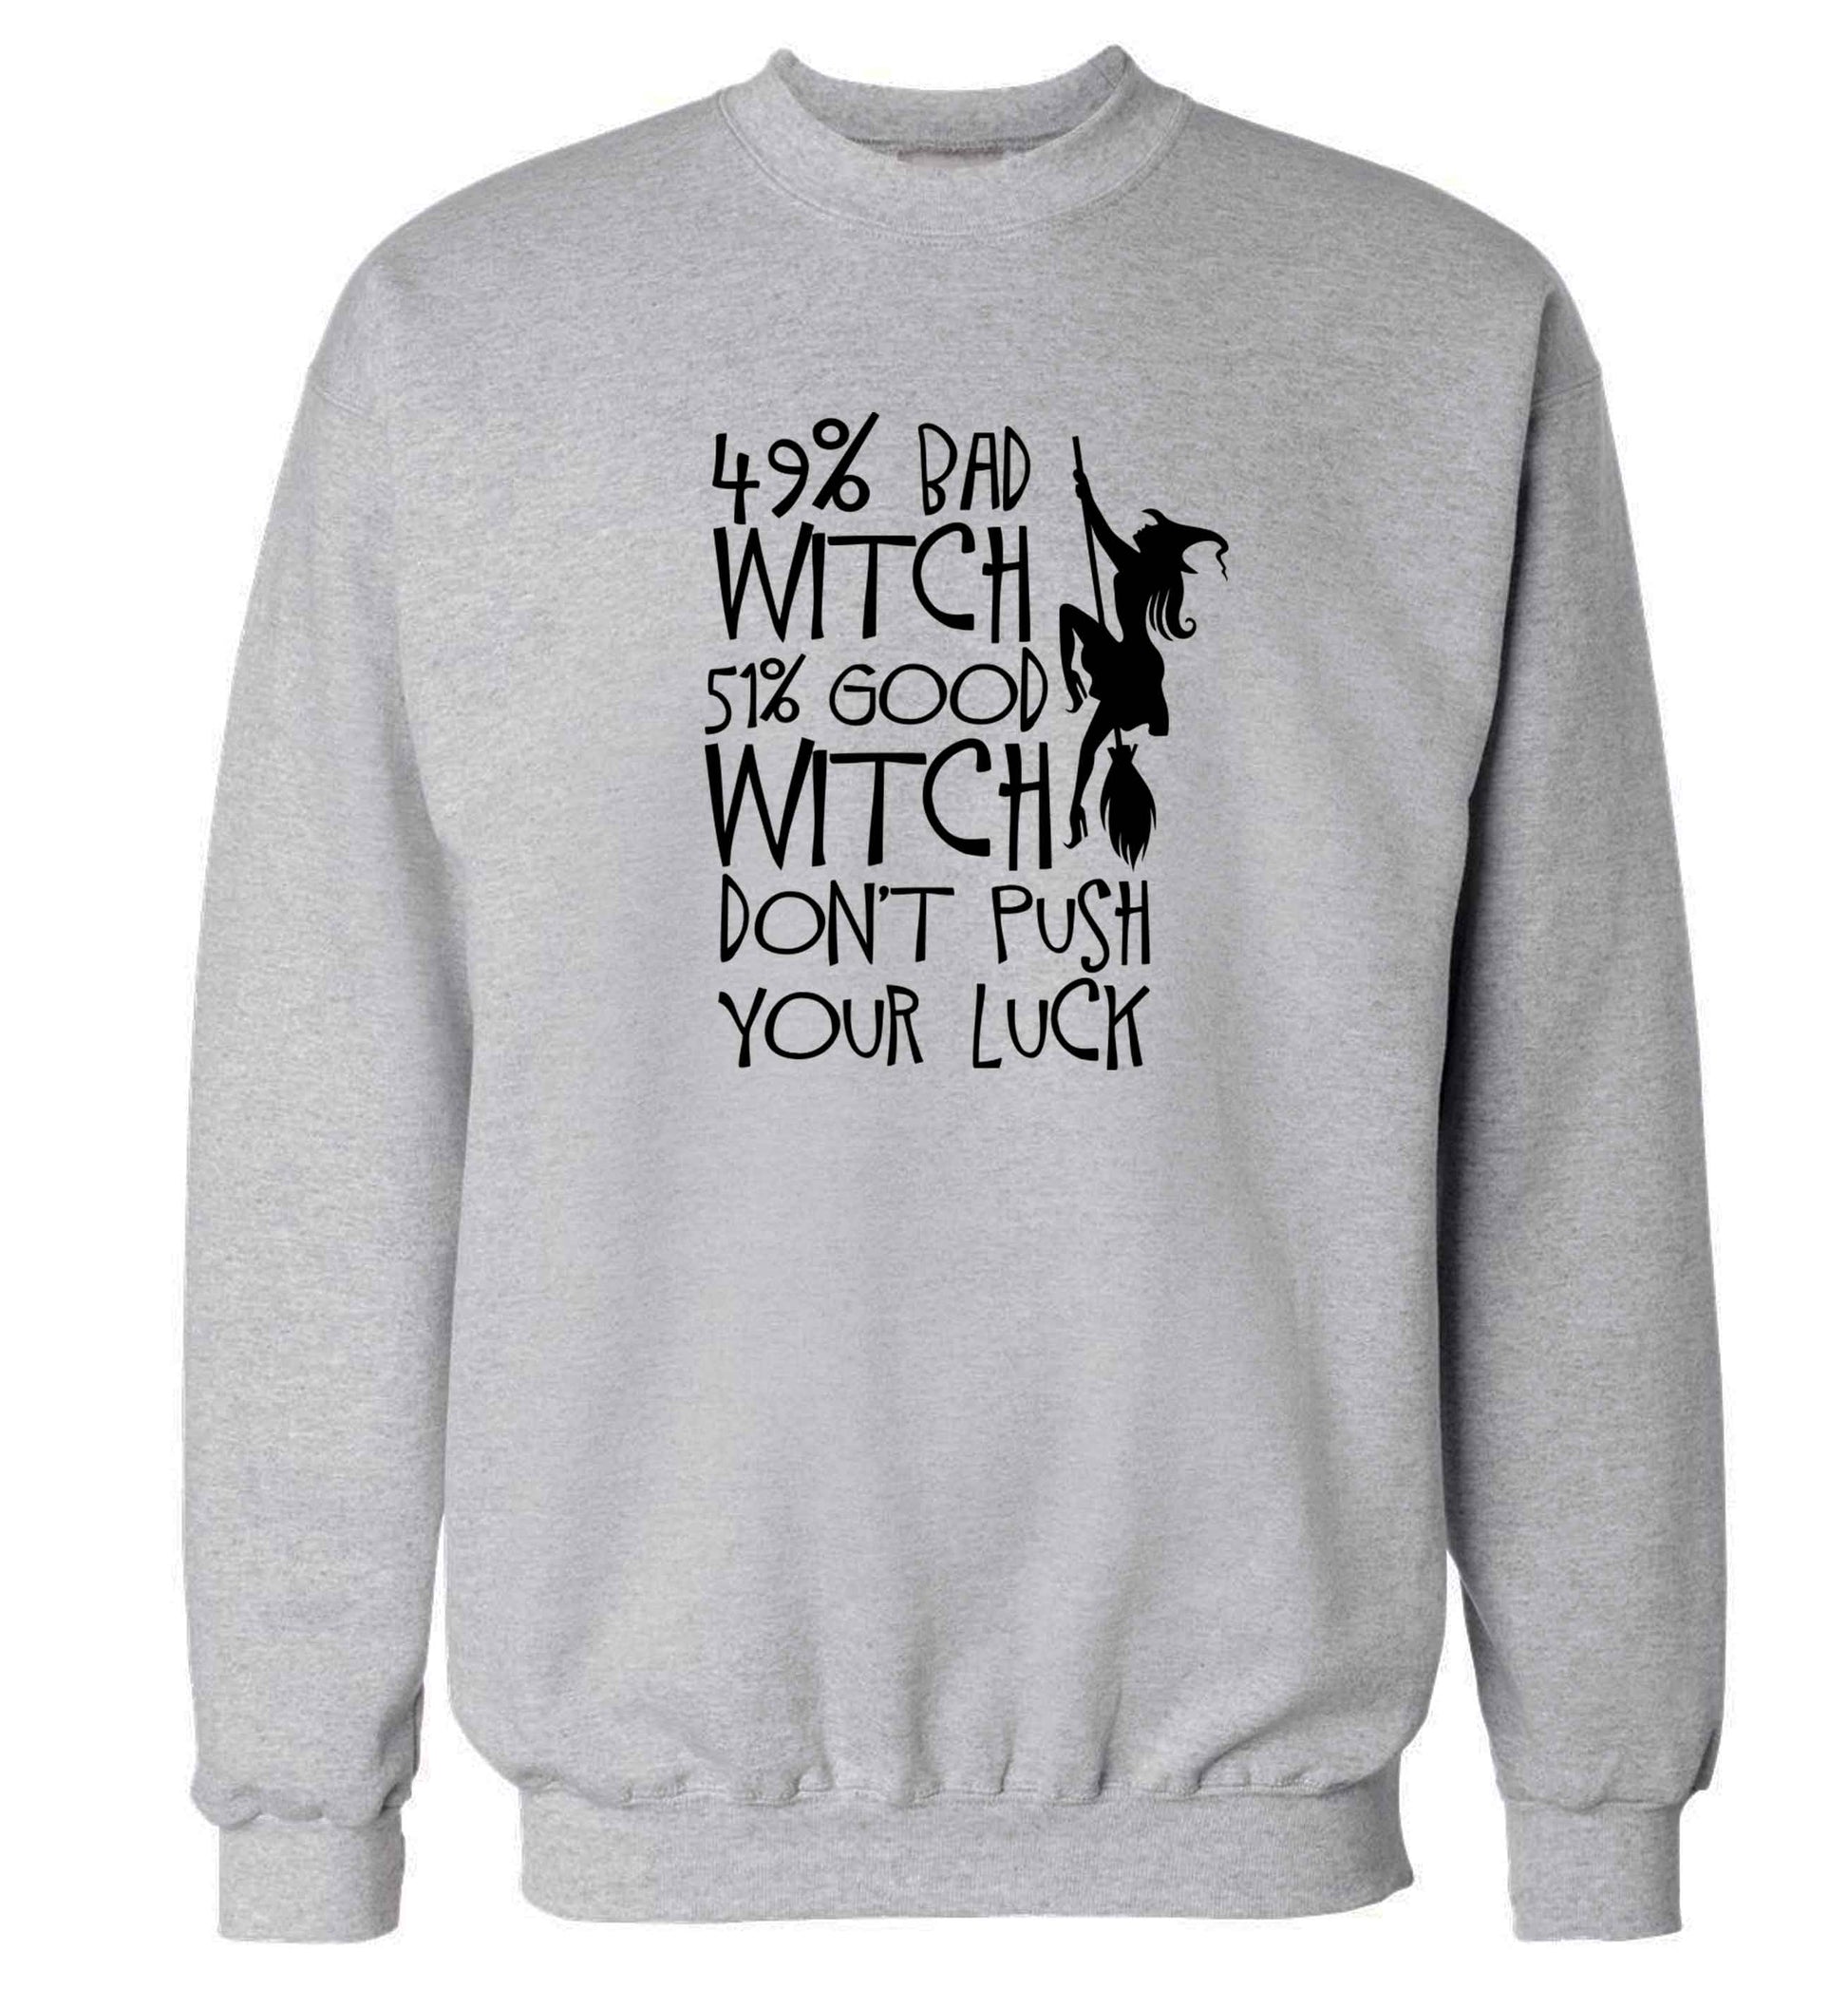 49% bad witch 51% good witch don't push your luck adult's unisex grey sweater 2XL